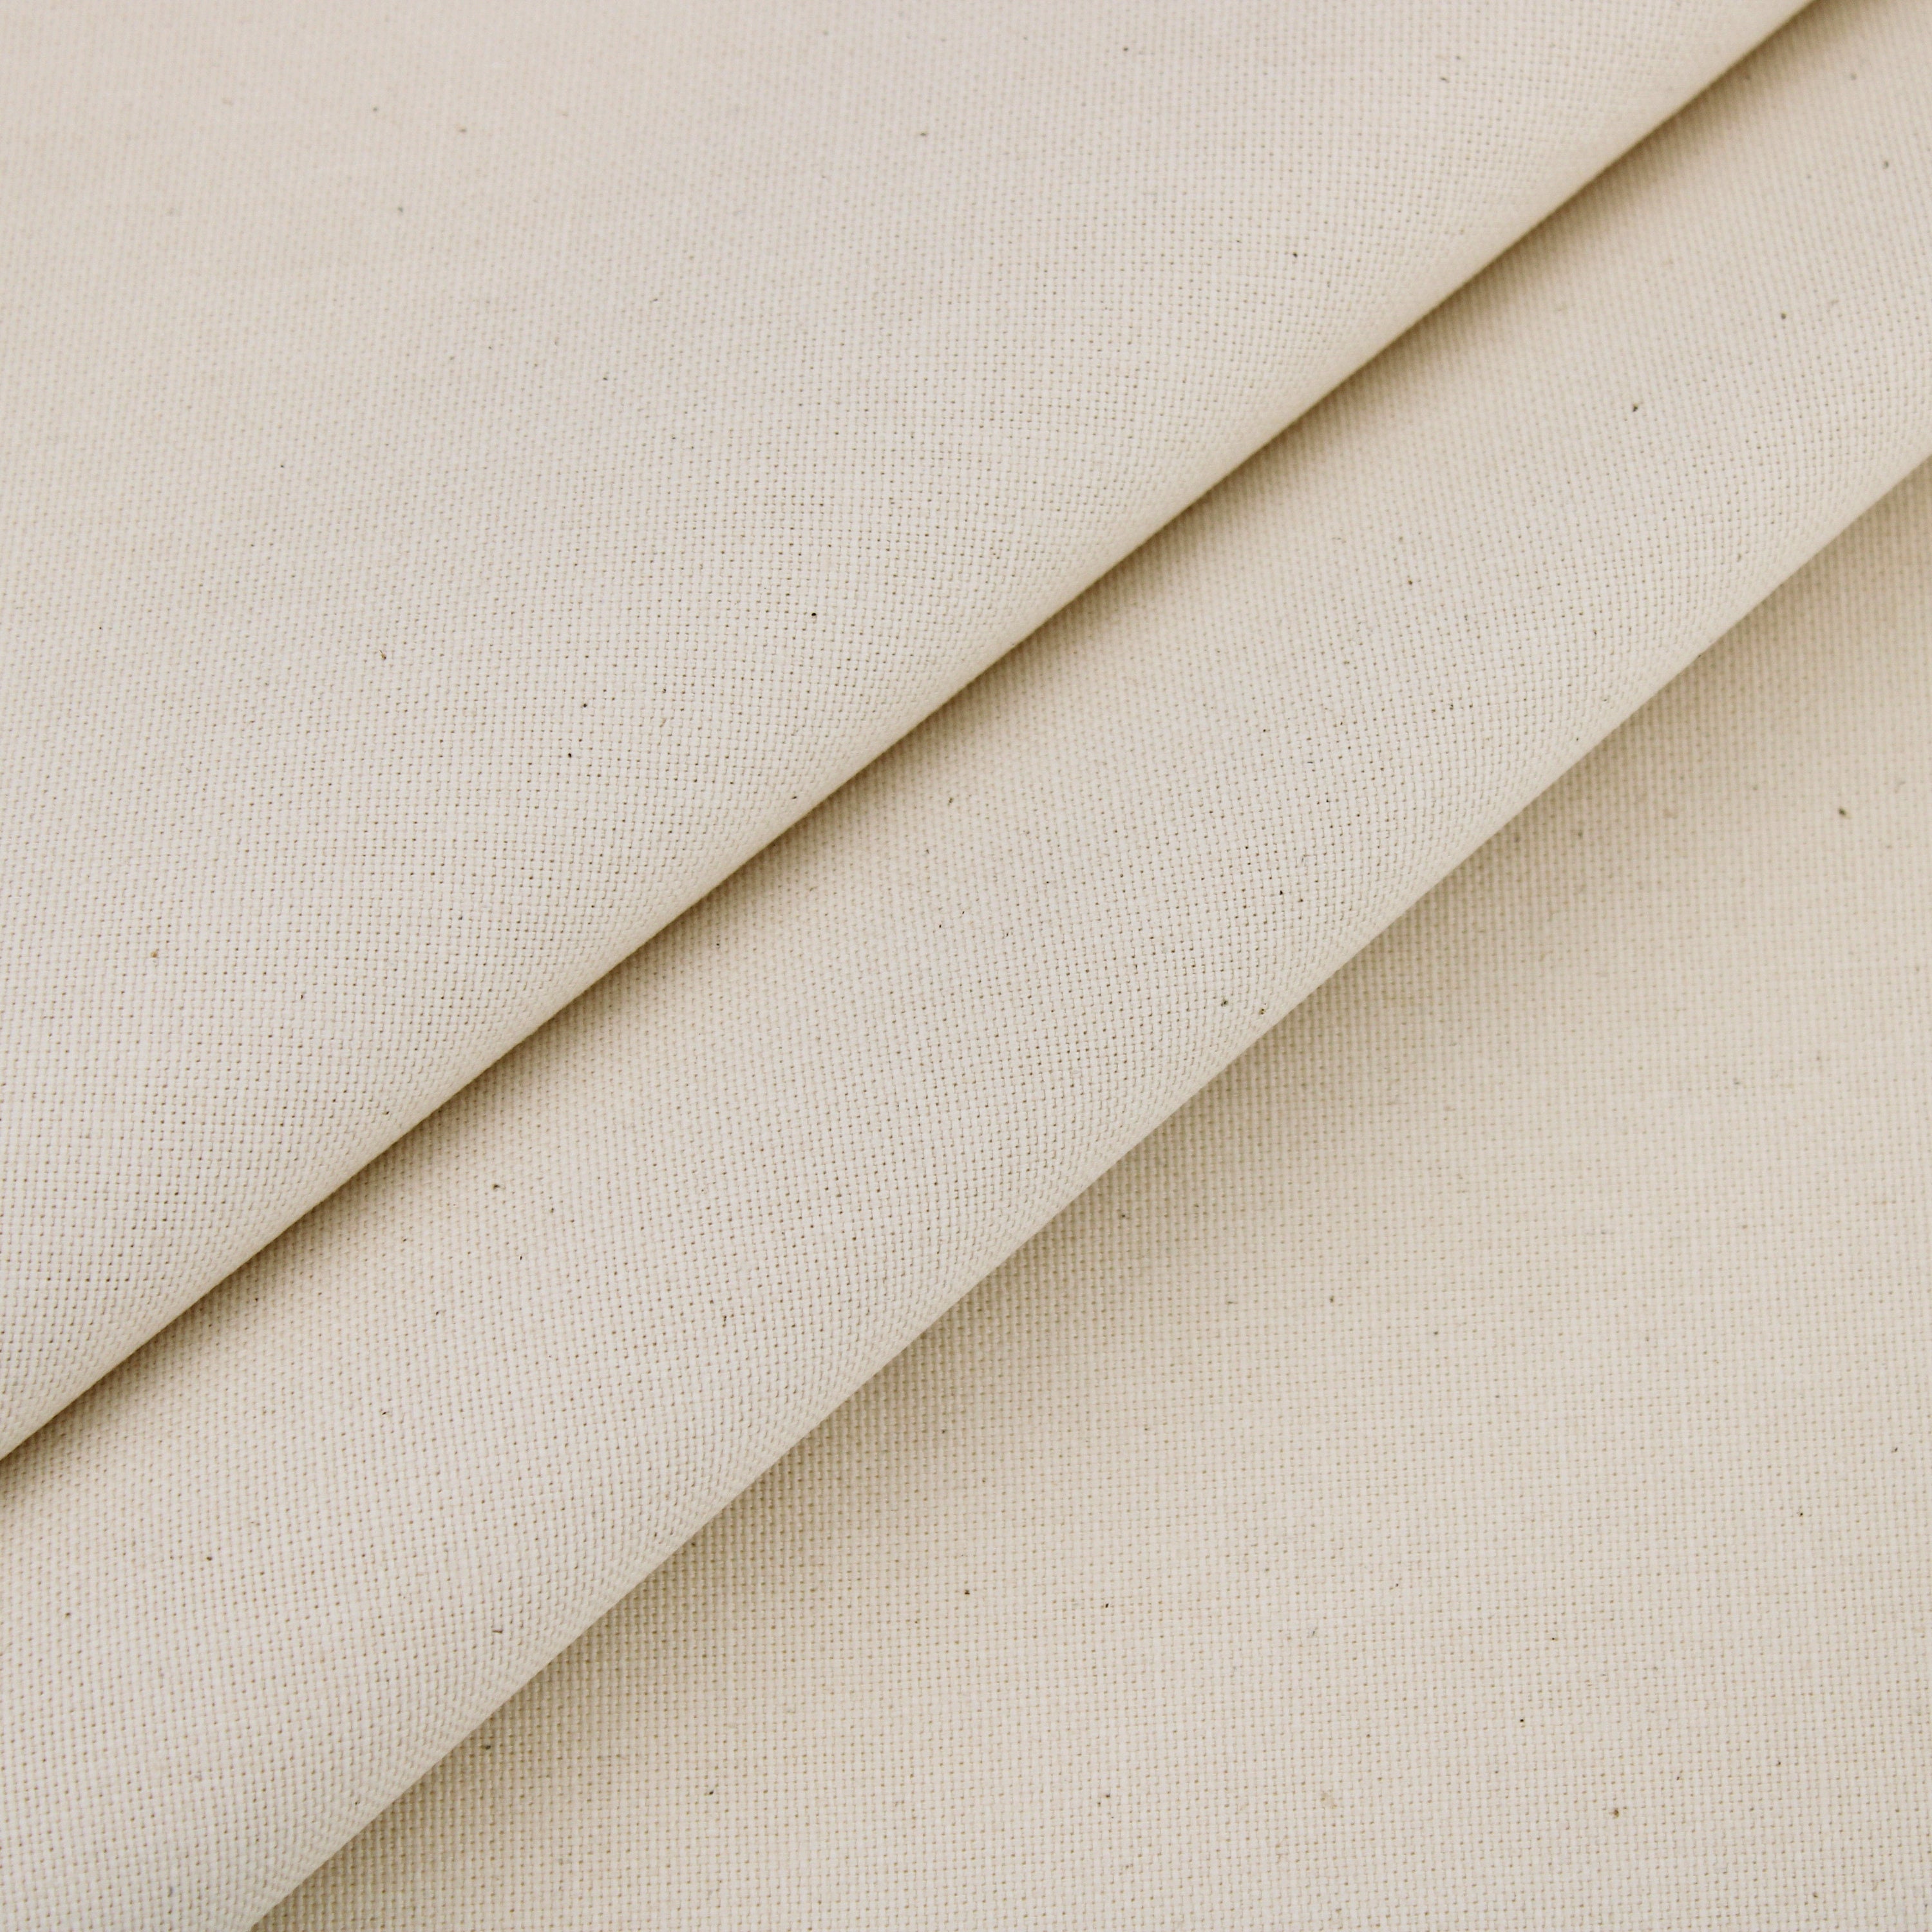 Cotton Canvas,calico & Cotton Linen Mix Fabrics for Craft,paint,apparel  Light Upholstery.unbleached Eco-friendly Vegan Material.dyeable 